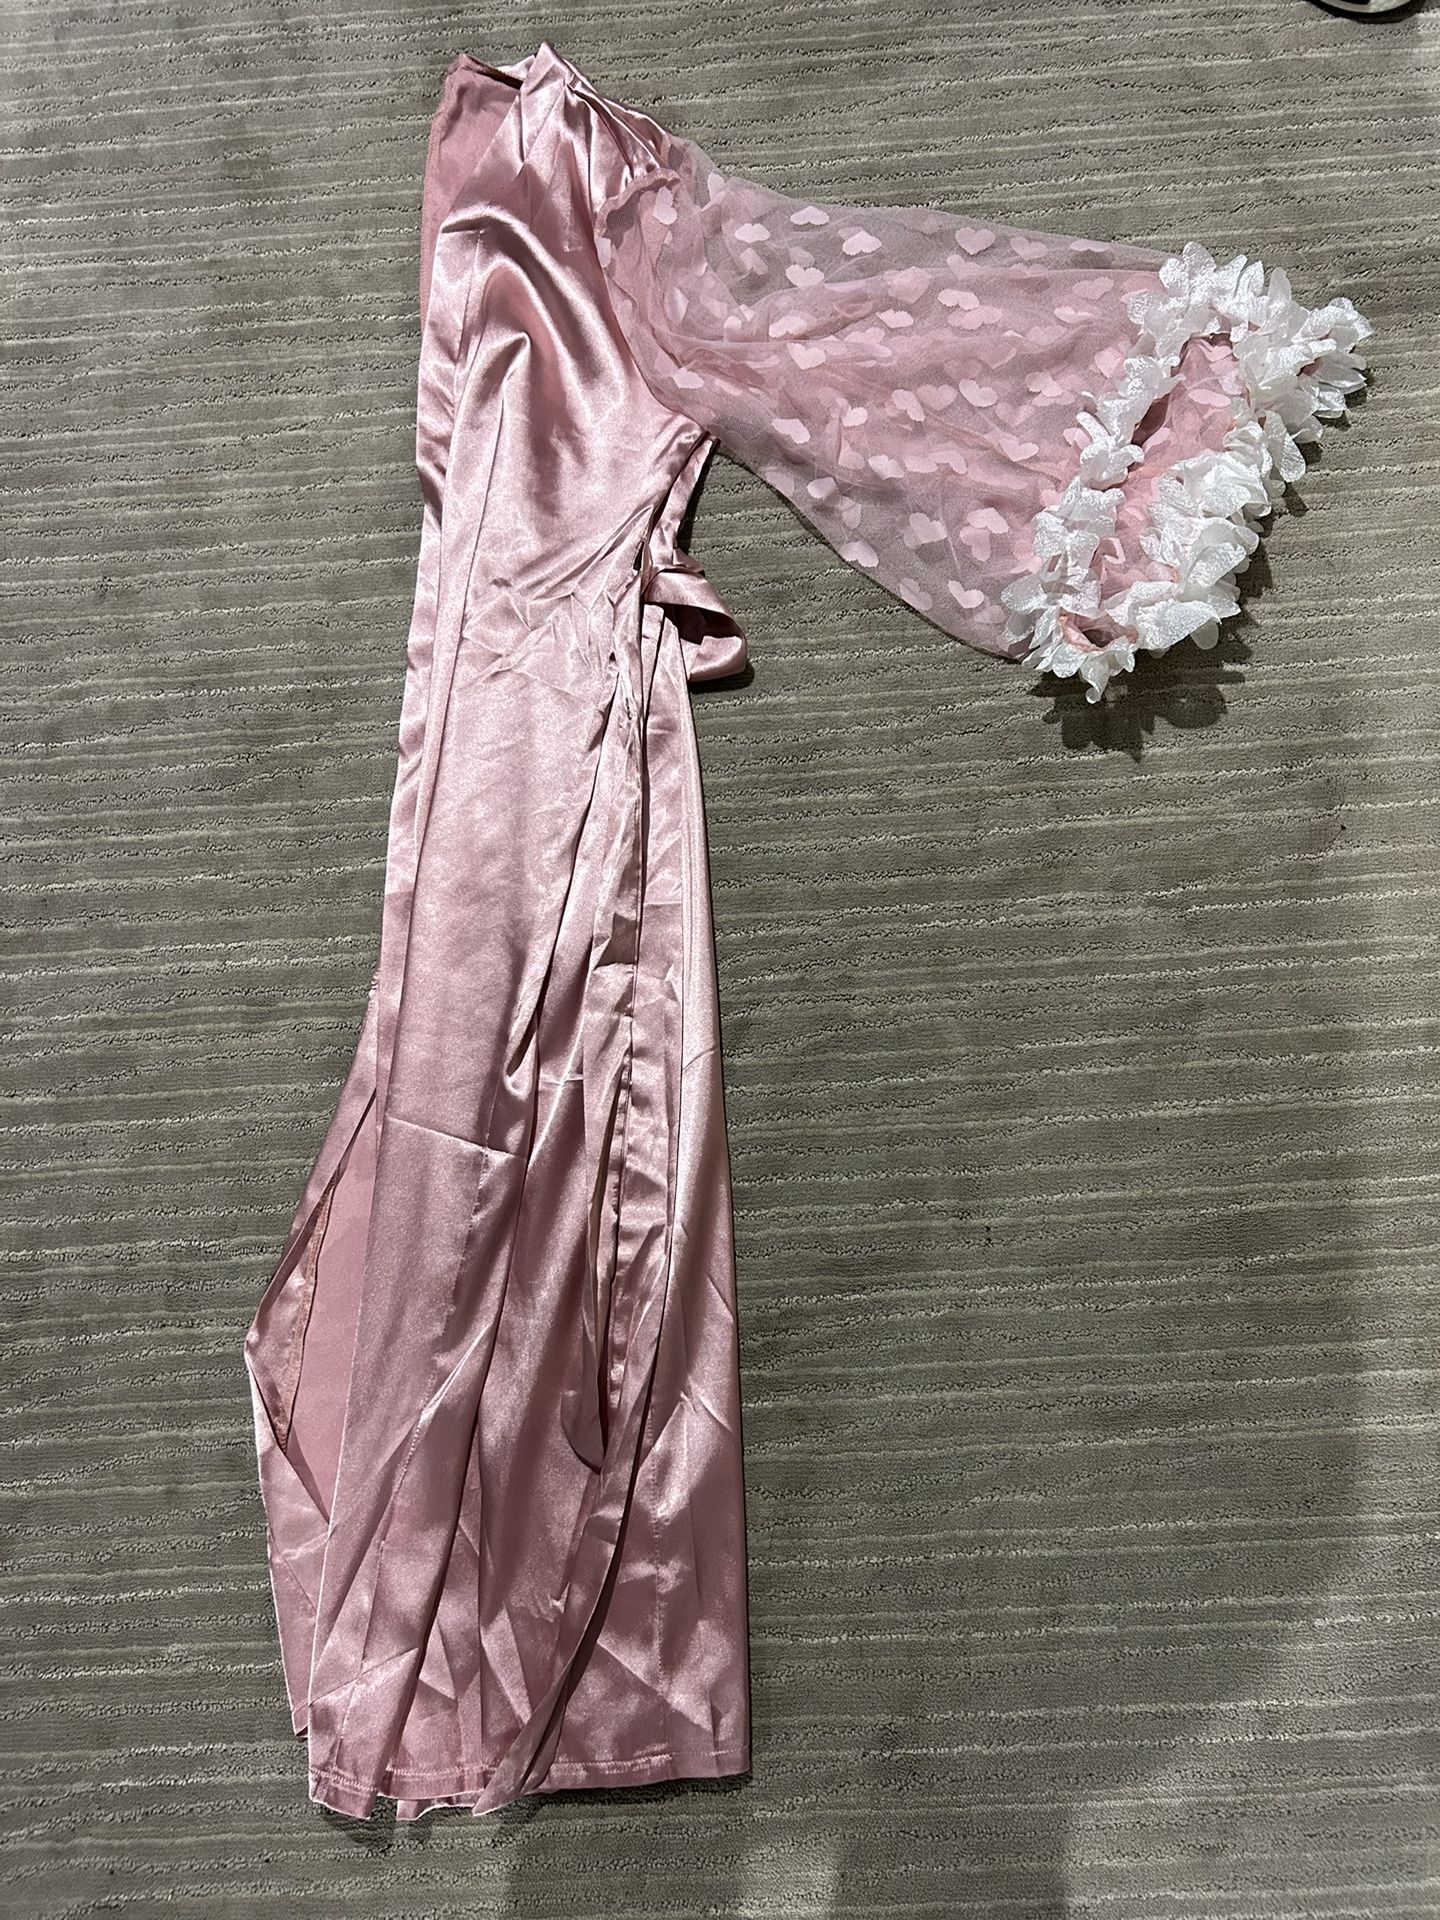 Very pretty pink long silky robe size large